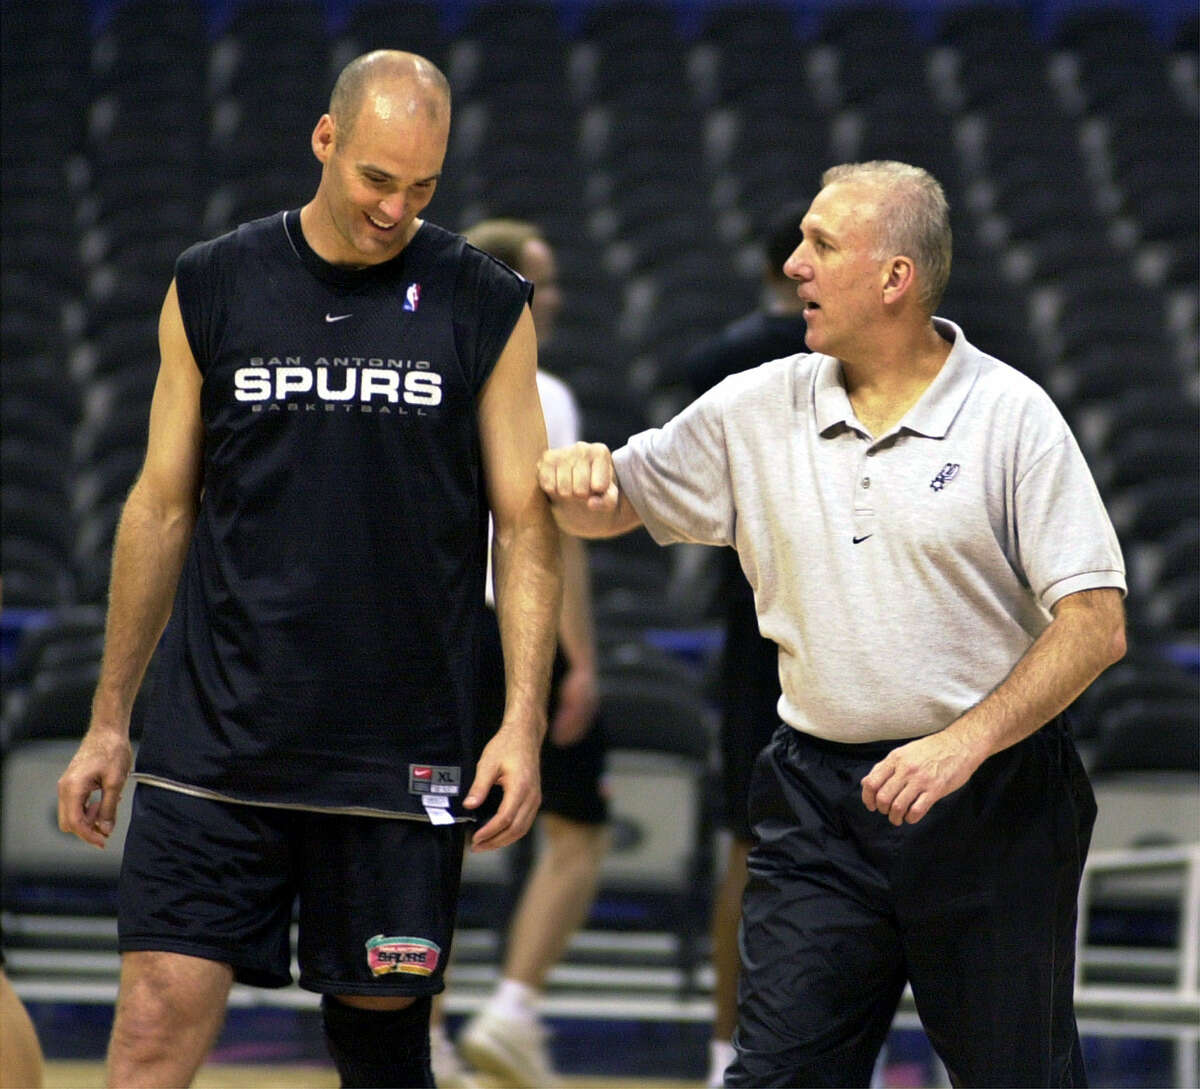 Spurs coach Gregg Popovich works with Danny Ferry during practice during the playoffs on May 16, 2001 at the Alamodome in San Antonio.